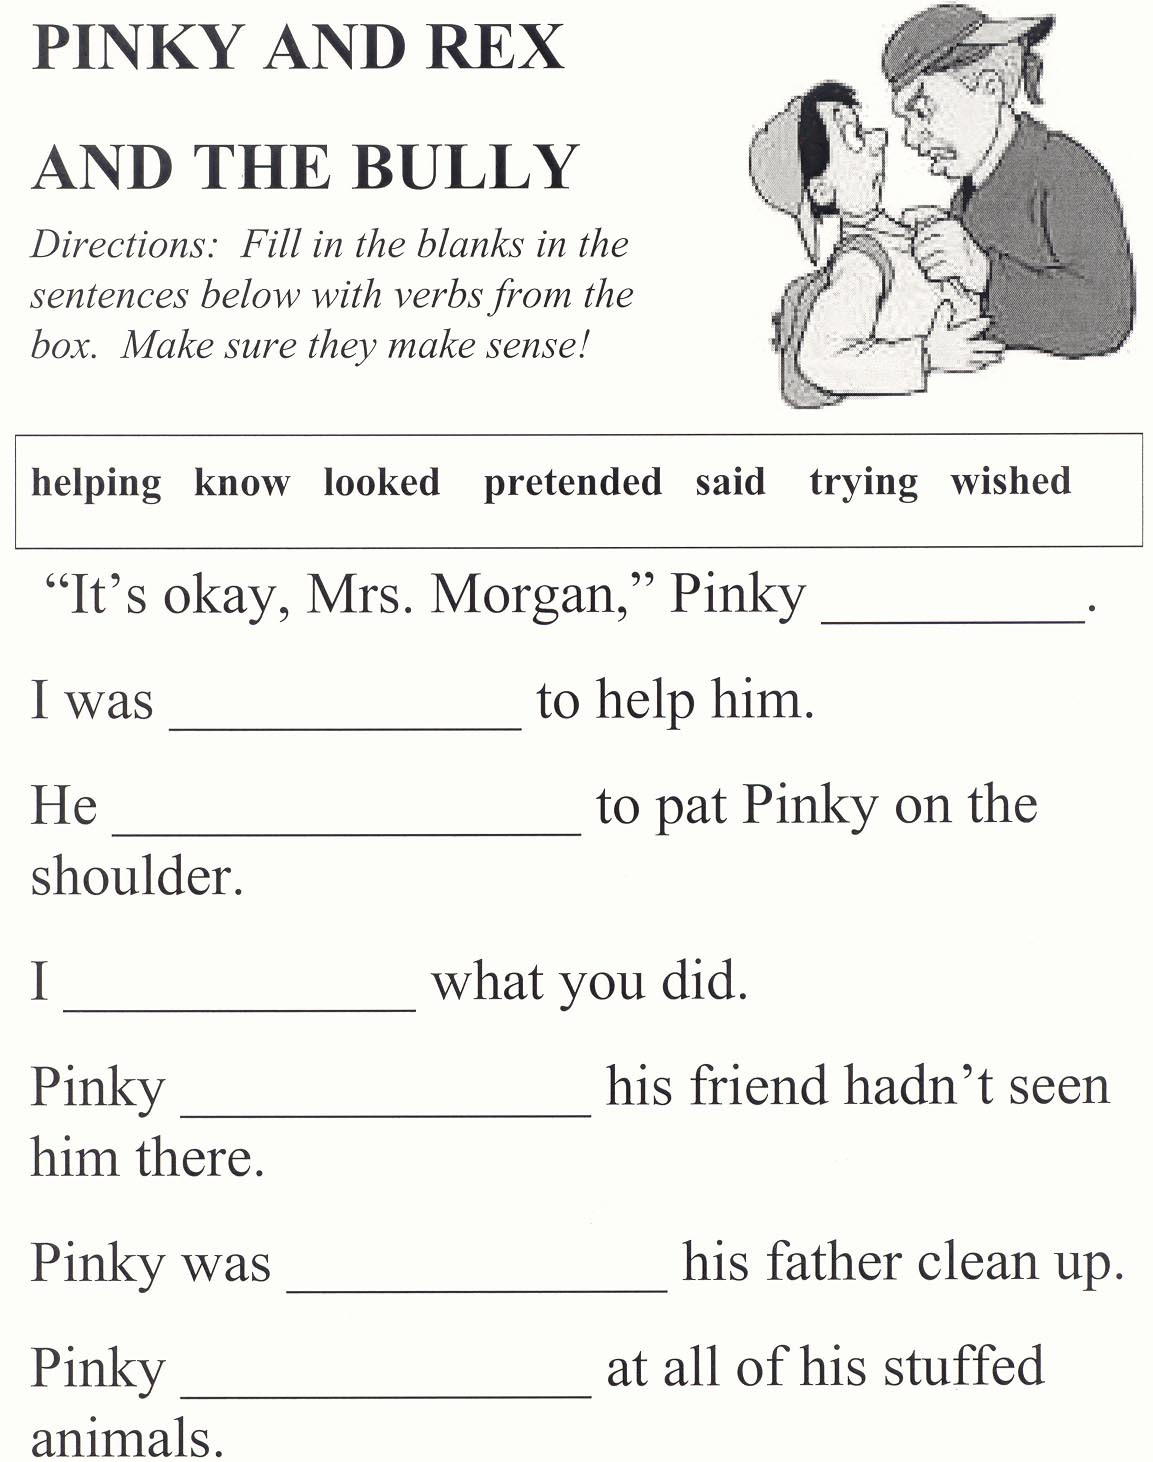 worksheets-on-bullying